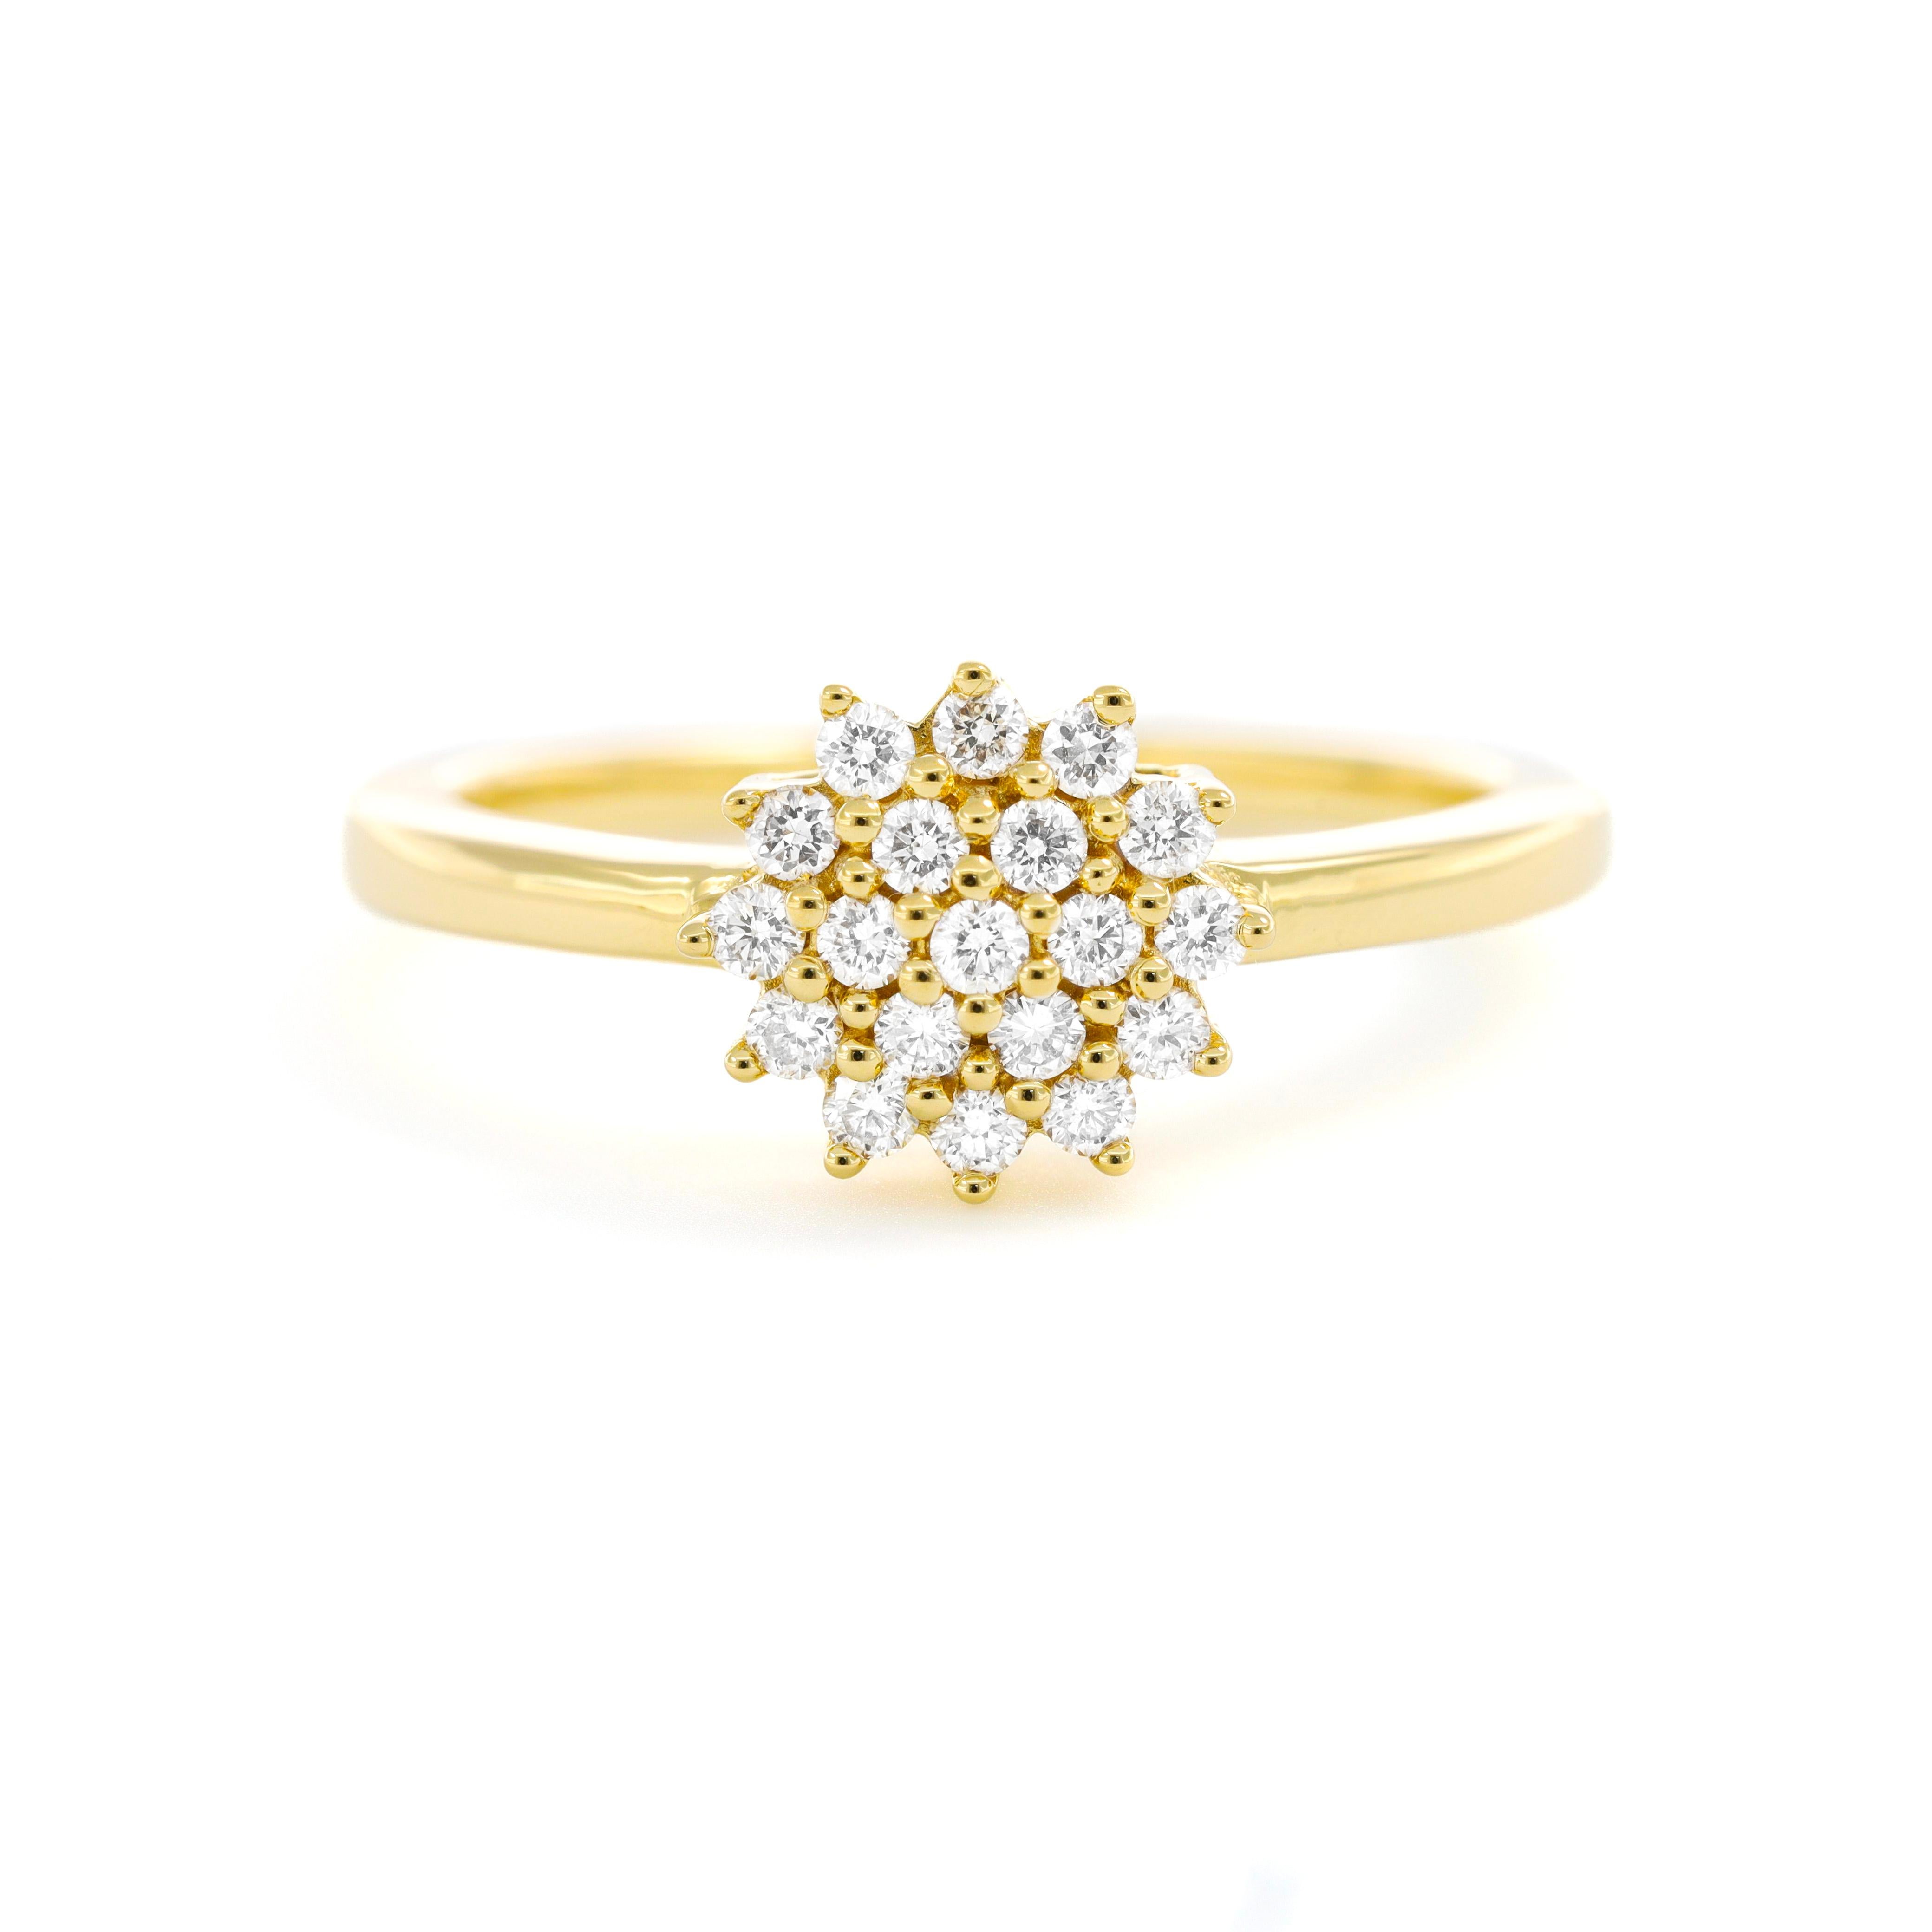 Brilliant Cut Natural Diamond 0.30 carats 18Karat Yellow Gold Cluster Engagement Ring For Sale